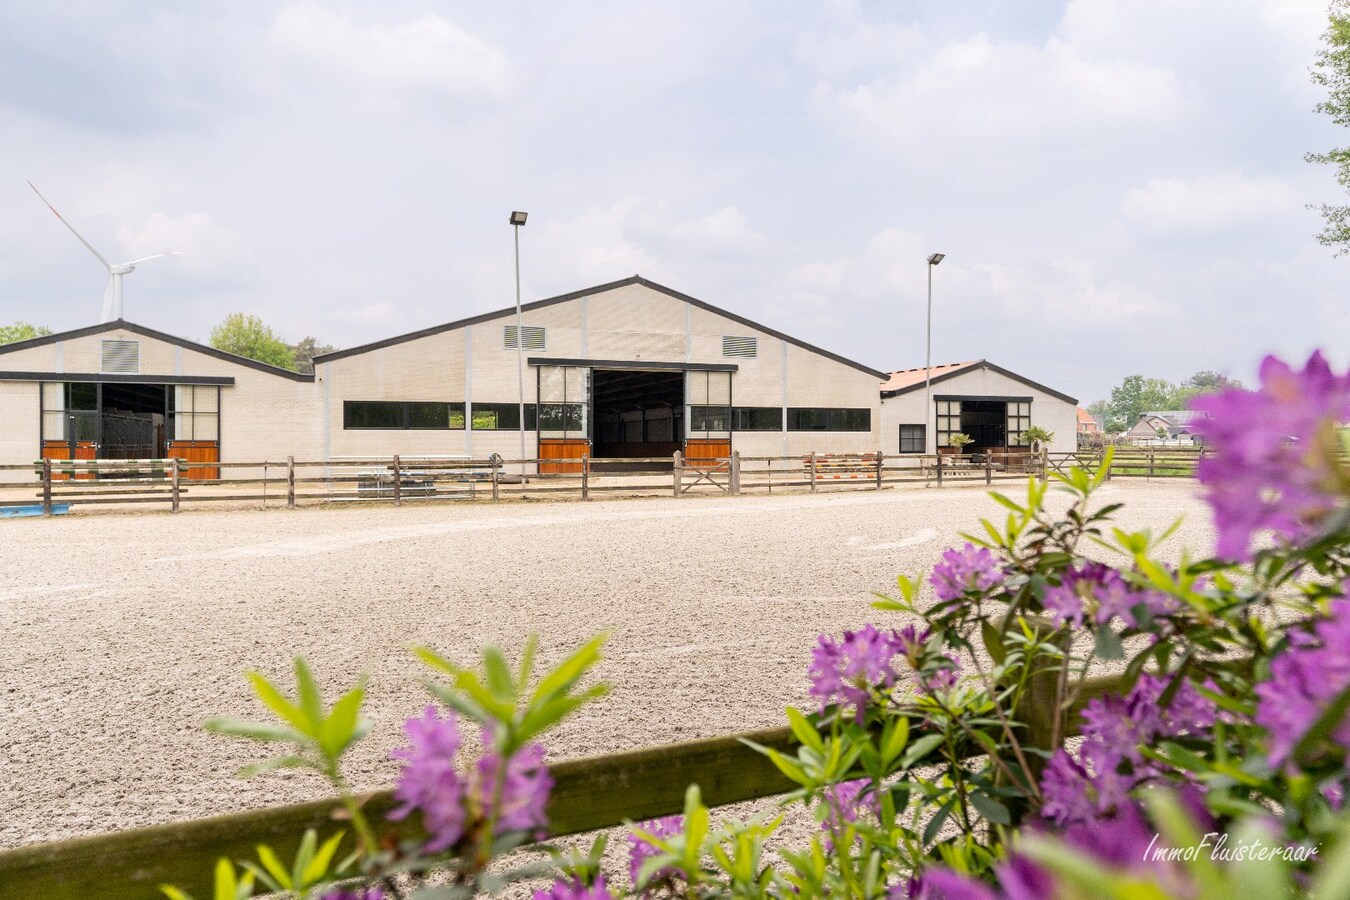 Beautiful villa with equestrian facilities and indoor arena on appr. 2 ha/4,95 acres in Paal. 